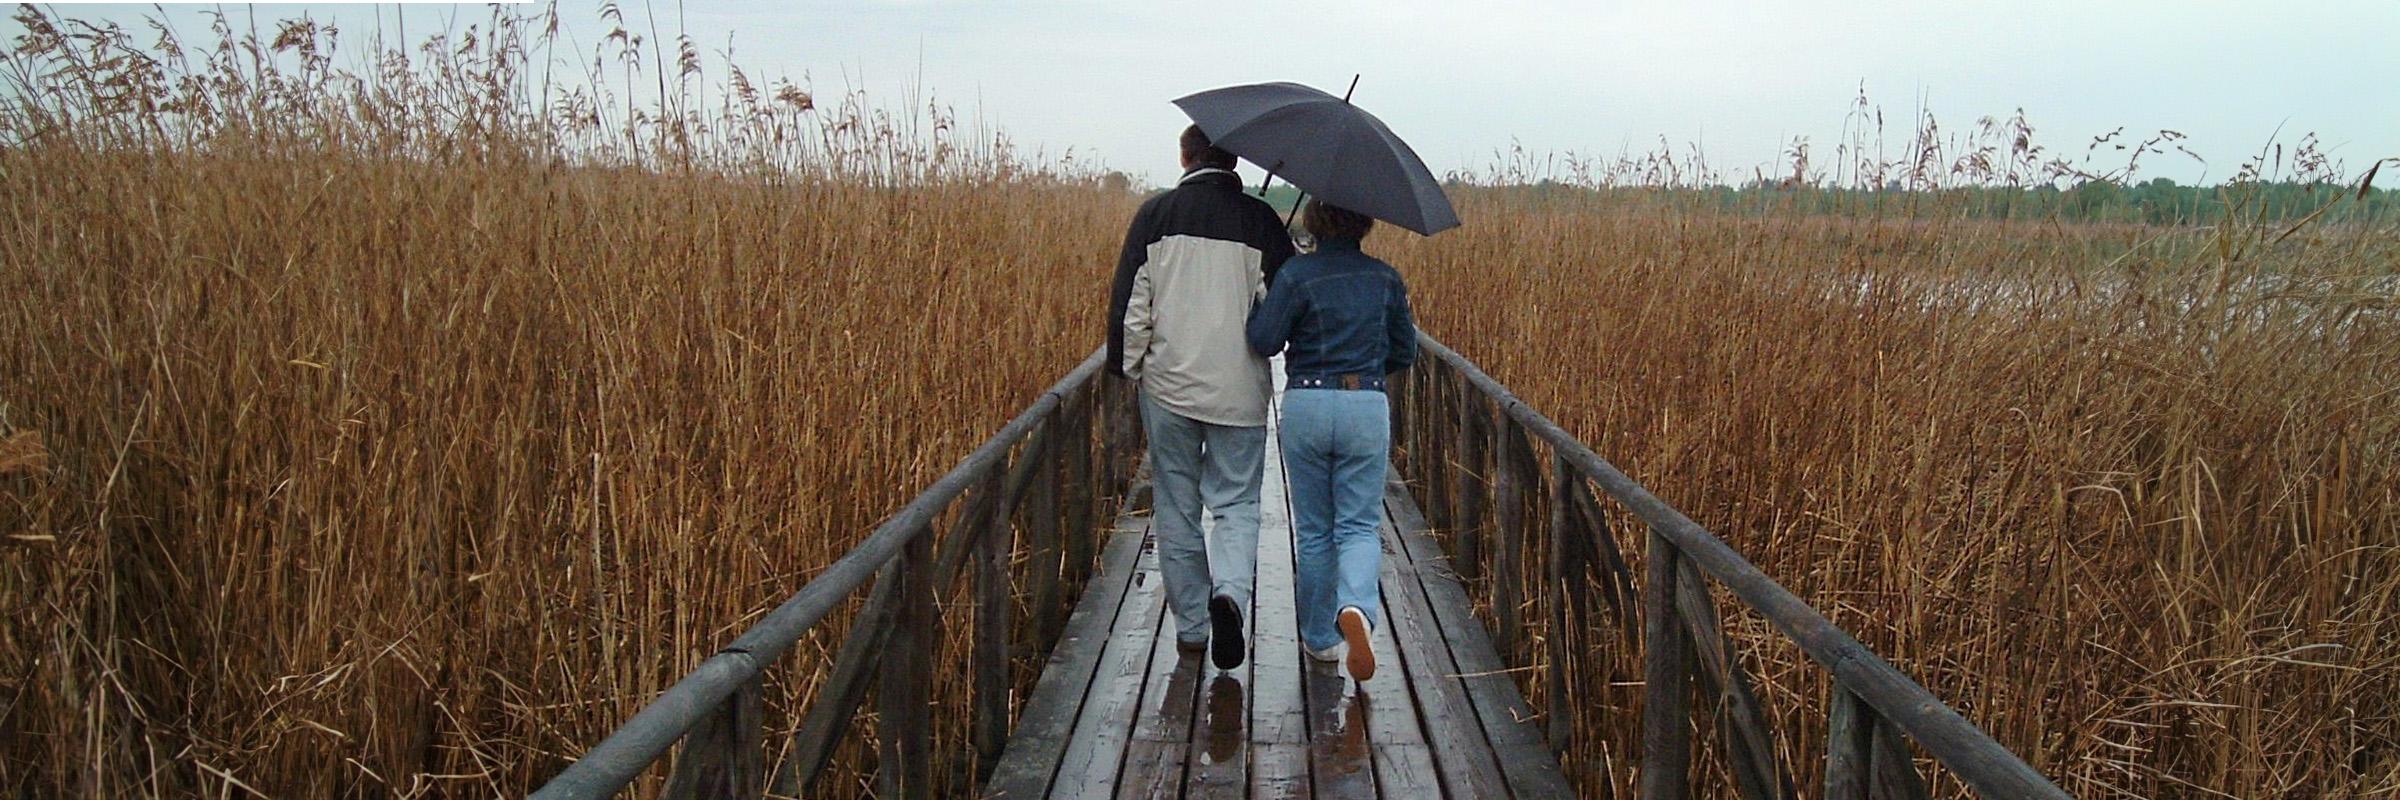 A photo of a couple (male and female) from behind, walking in the rain with a cloudy sky with an umbrella on a wooden path surrounded by orange tall grass.